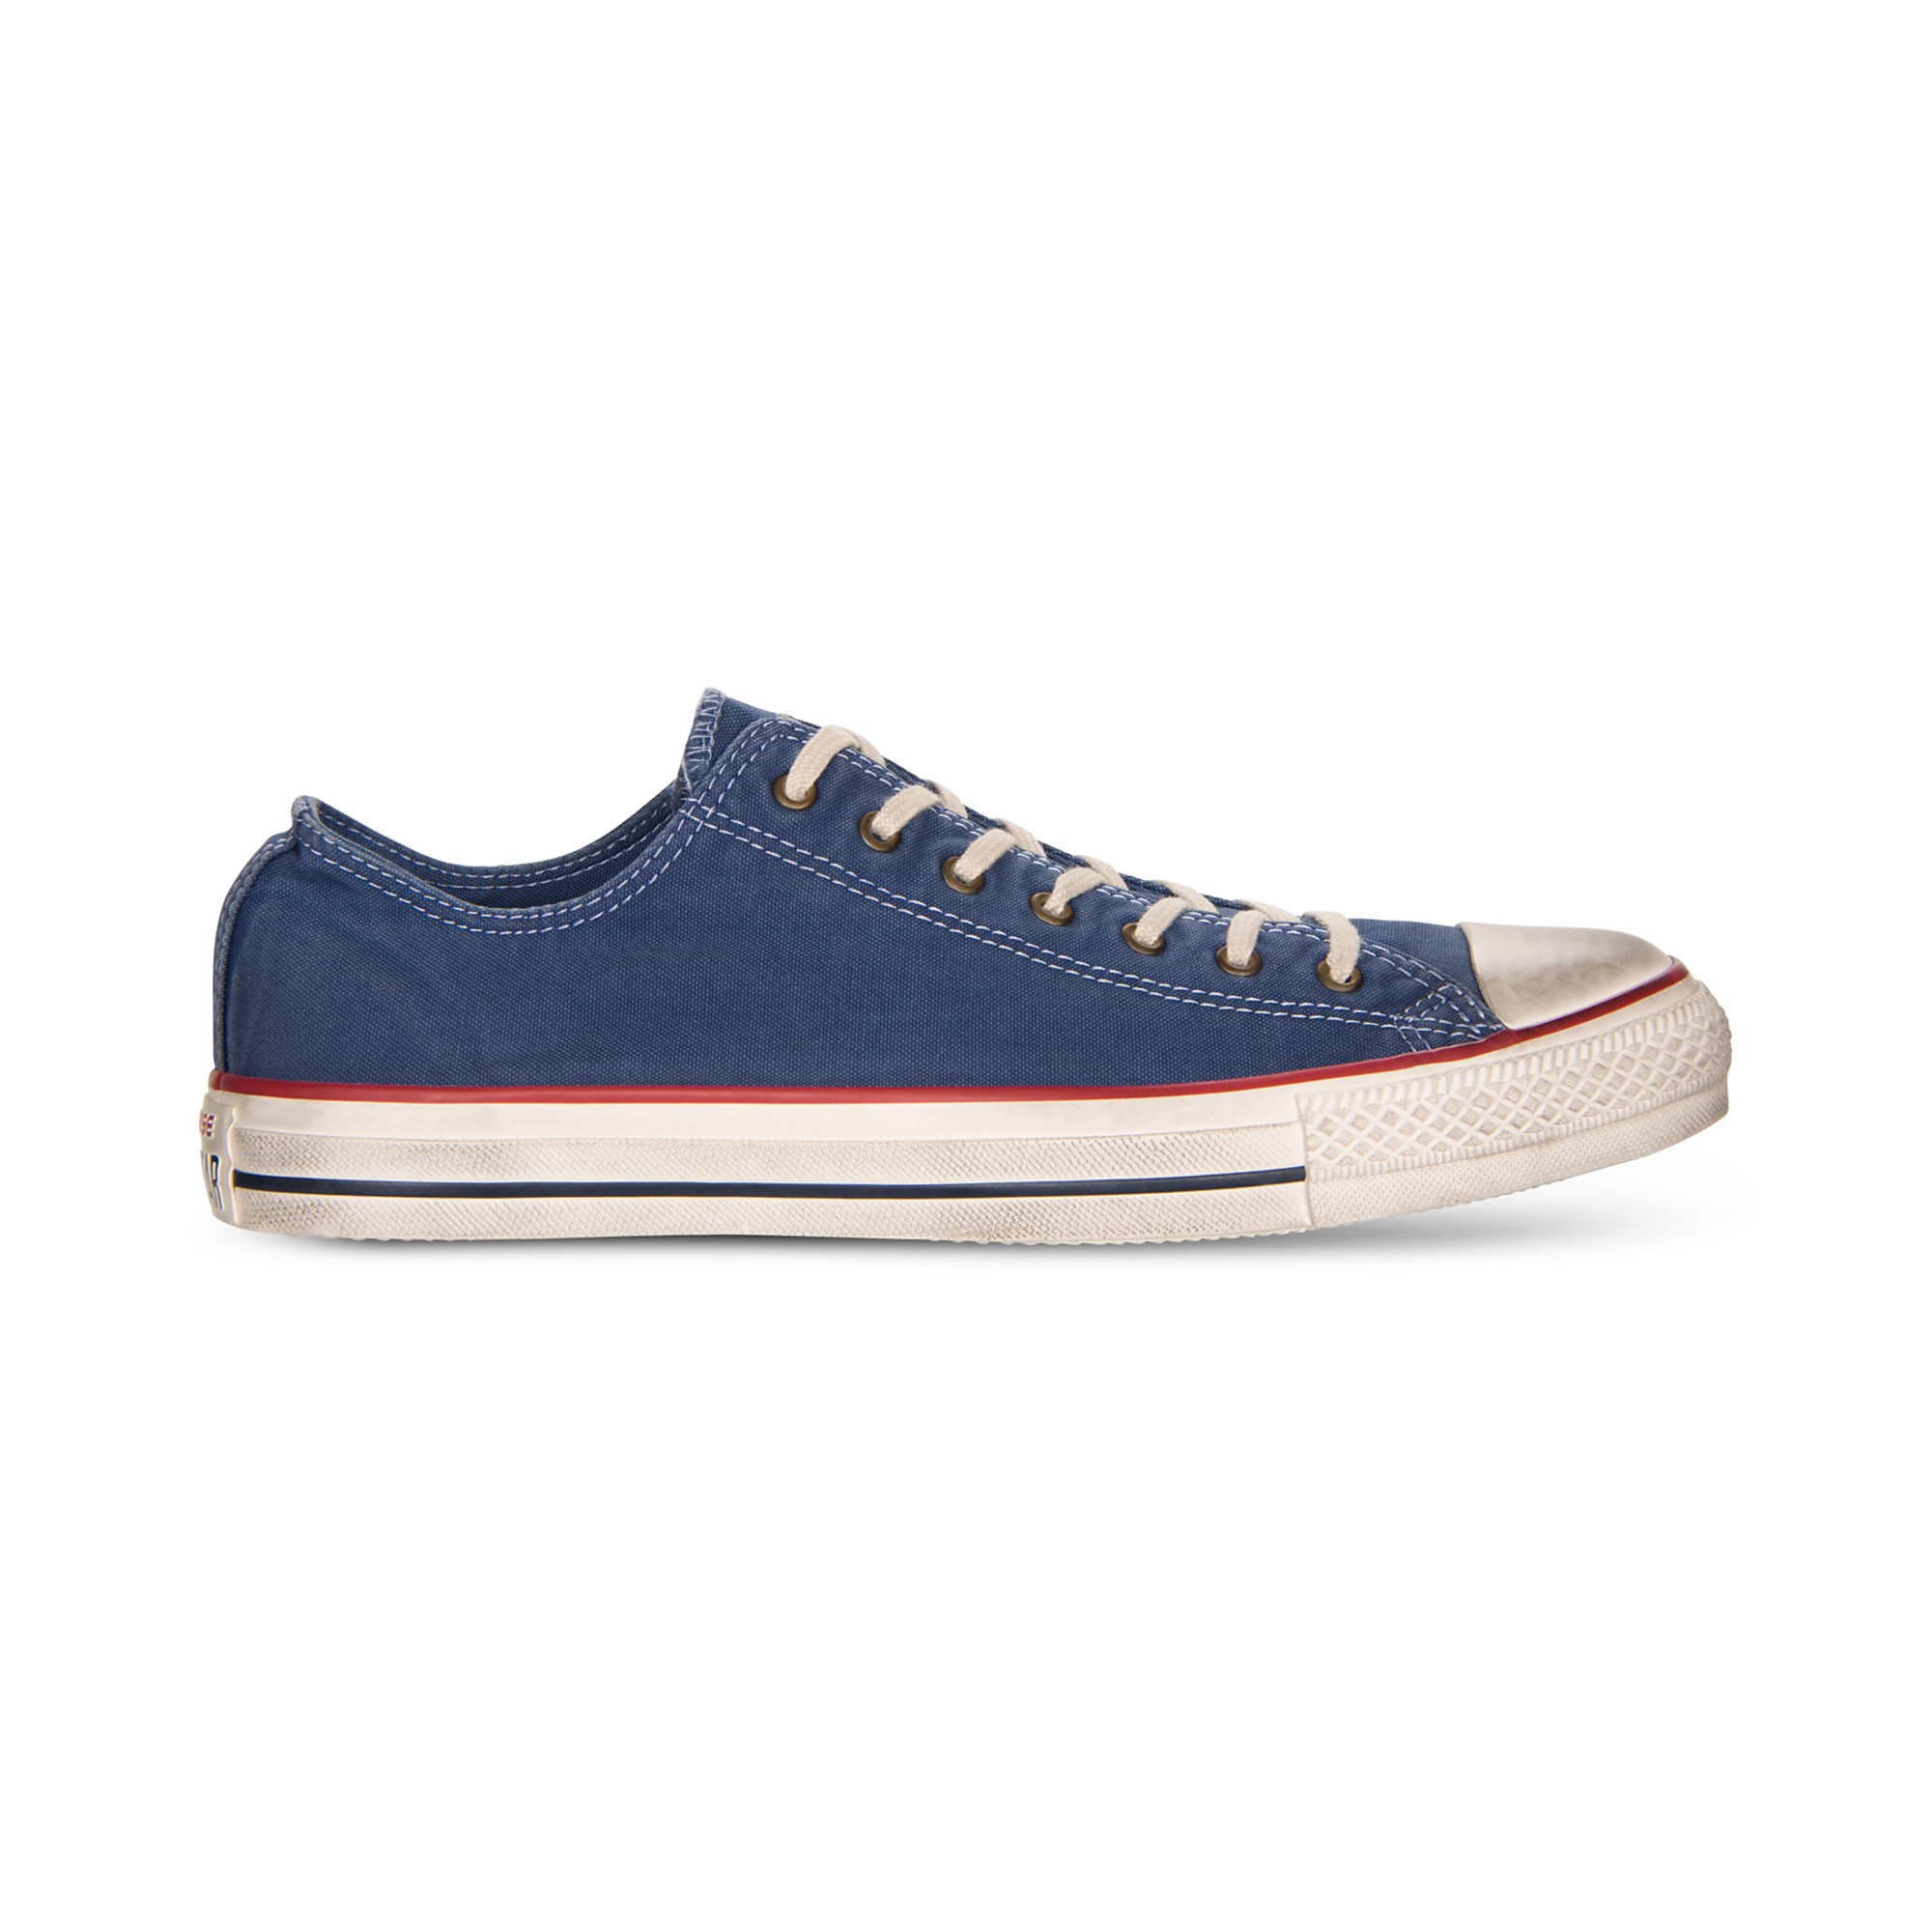 Lyst - Converse Chuck Taylor Ox Washed Sneakers in Blue for Men